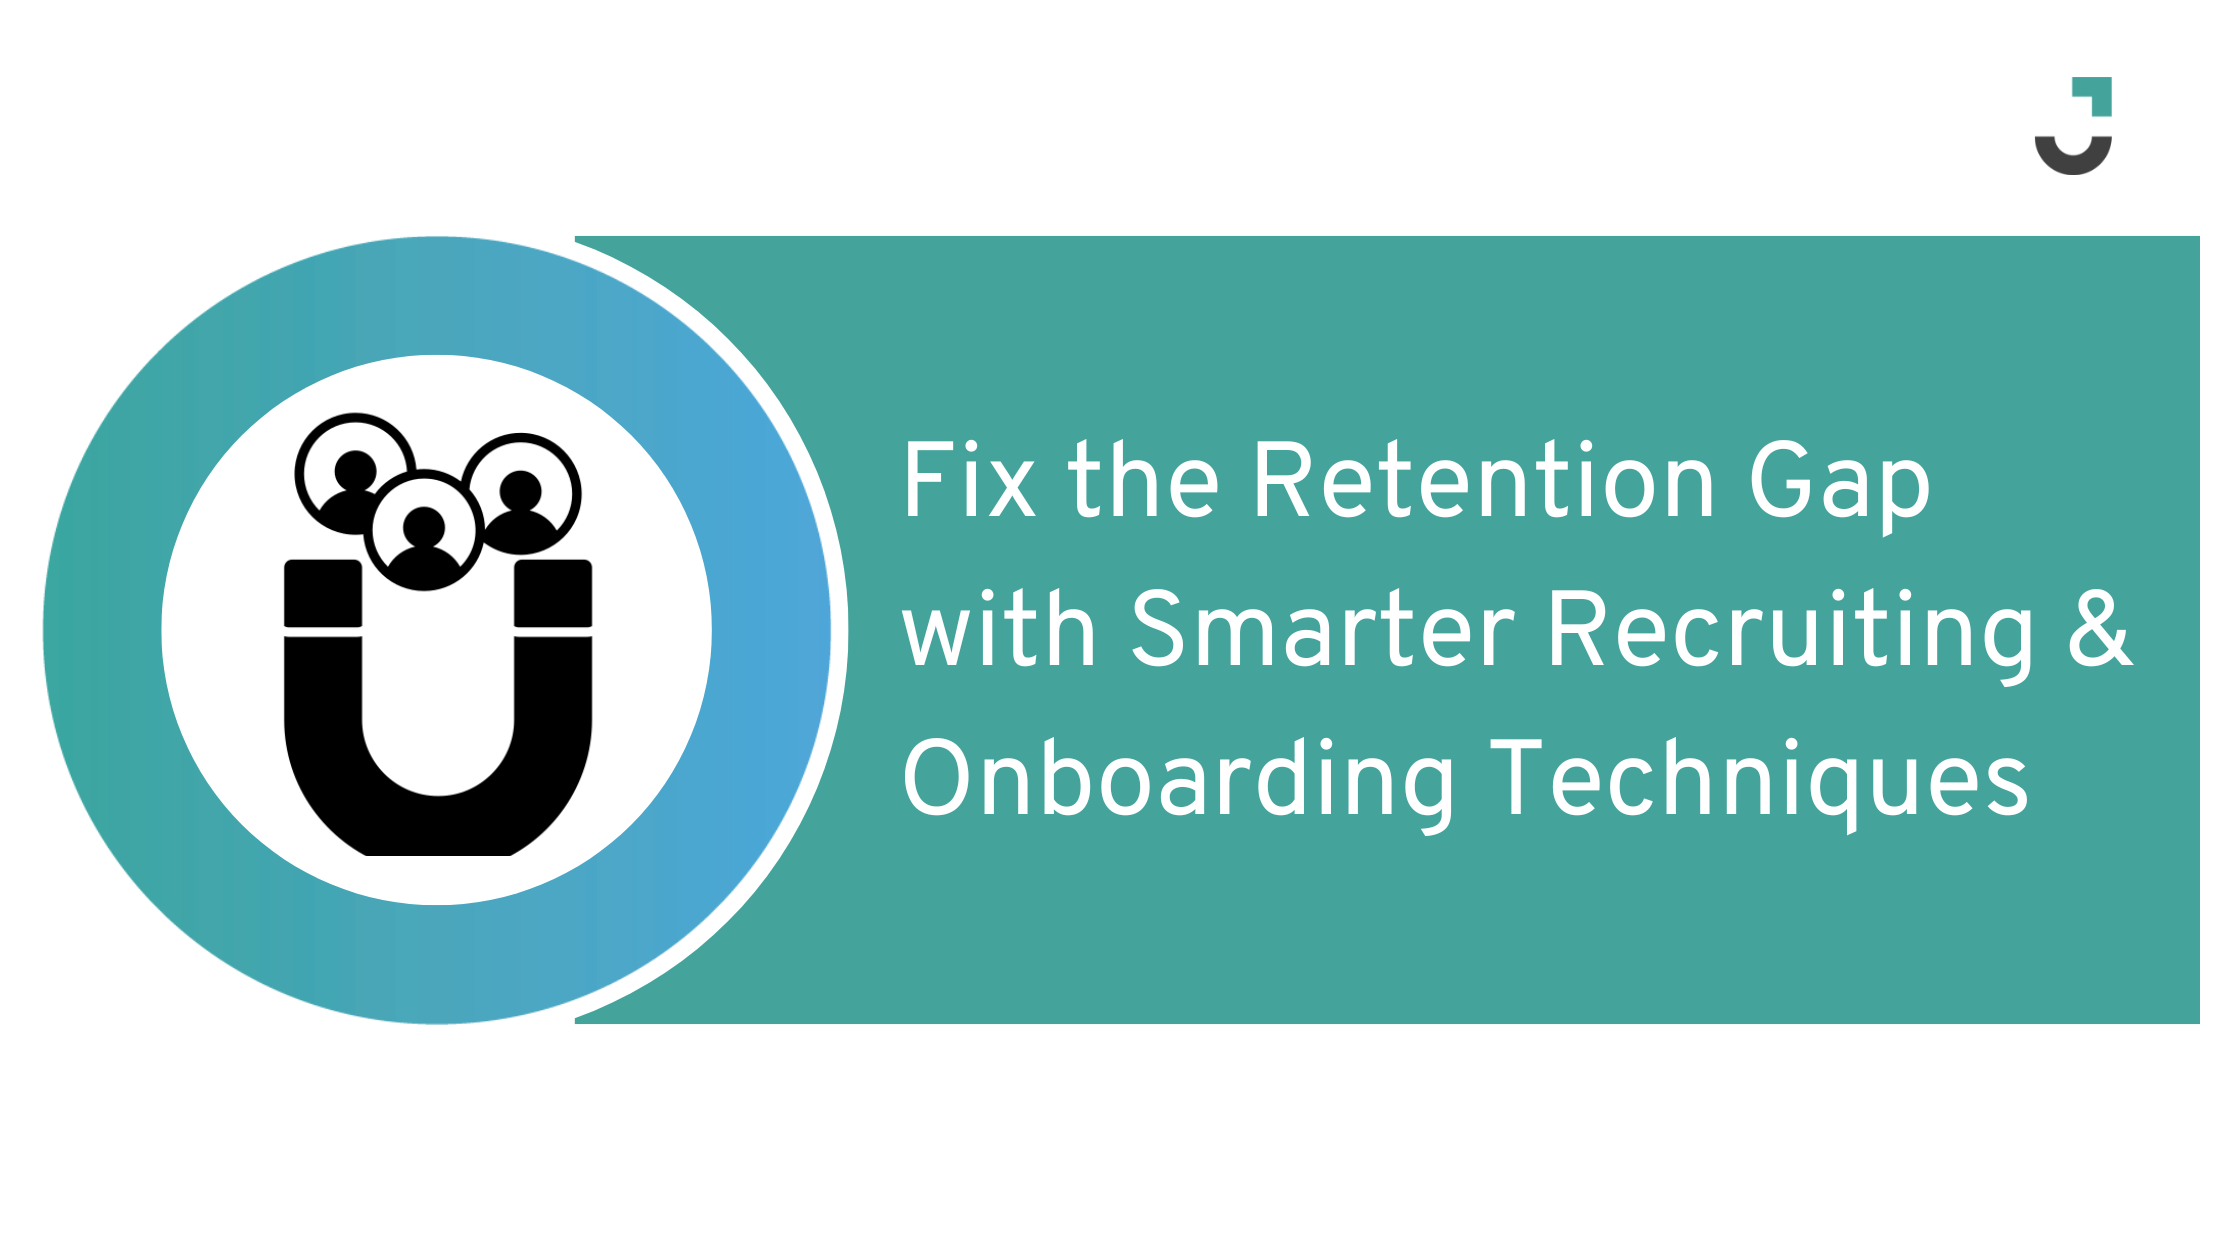 Fix the Retention Gap with Smarter Recruiting & Onboarding Techniques